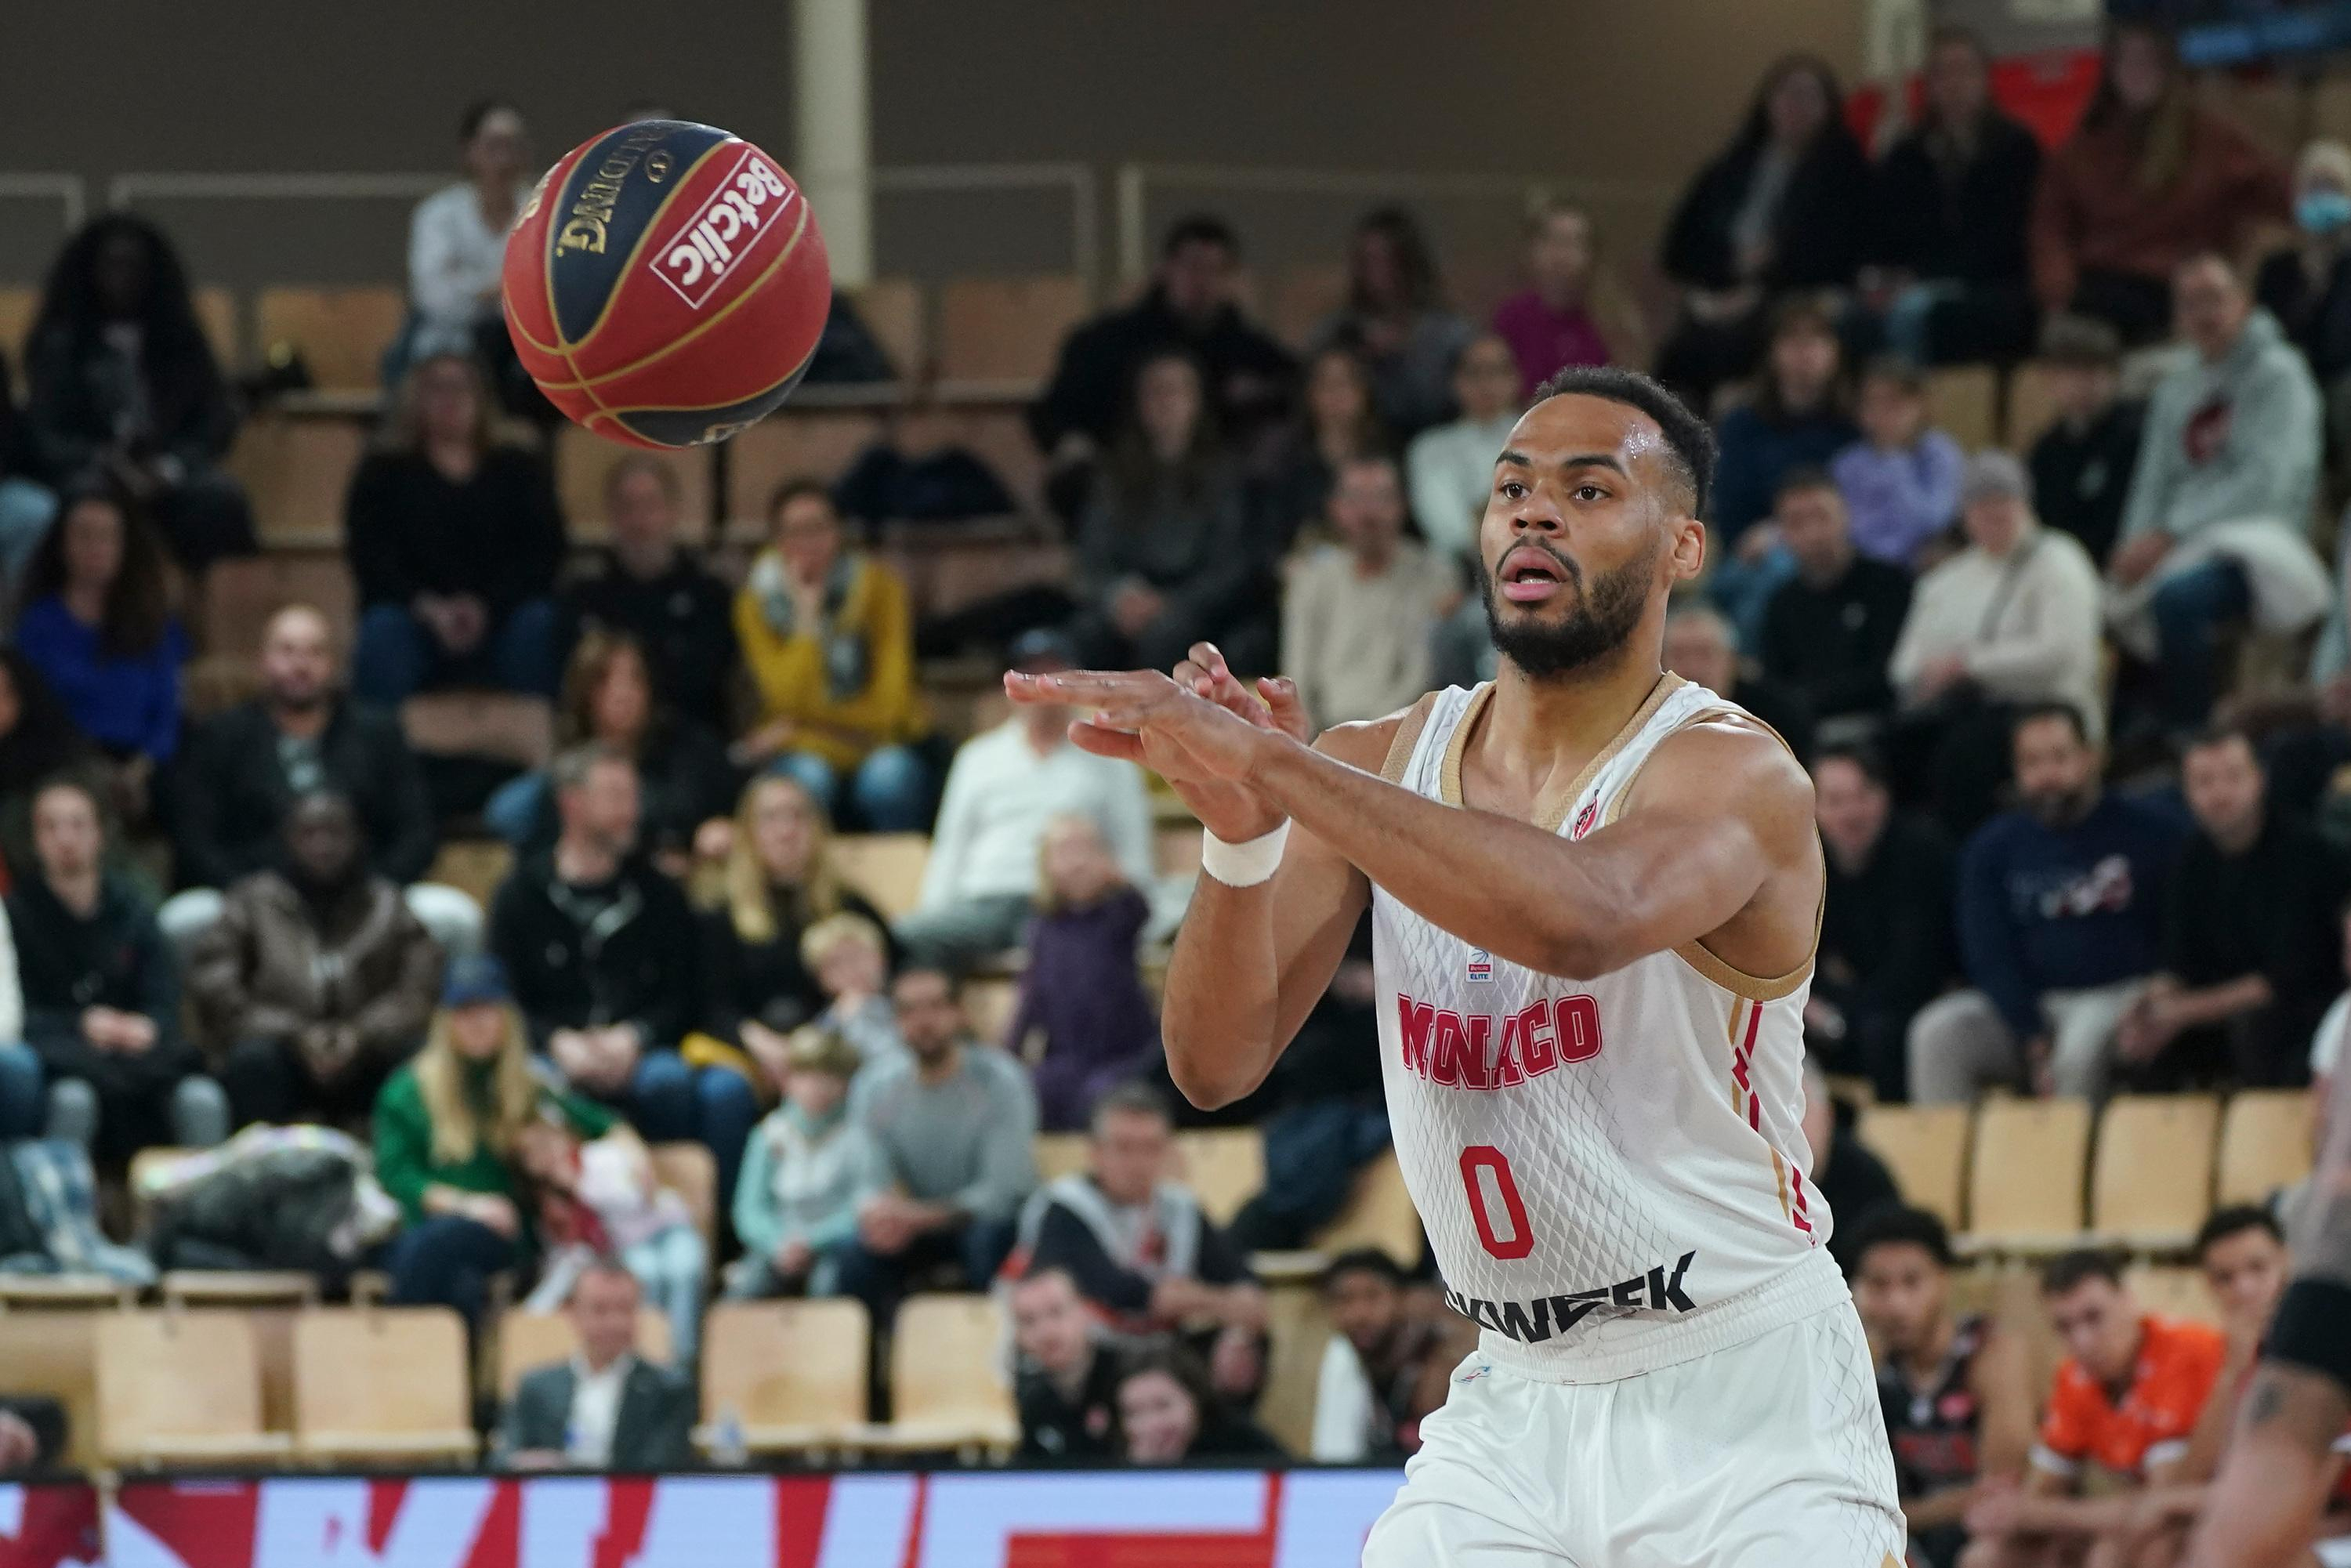 Euroleague: at the end of the suspense, Monaco wins against Efes Istanbul